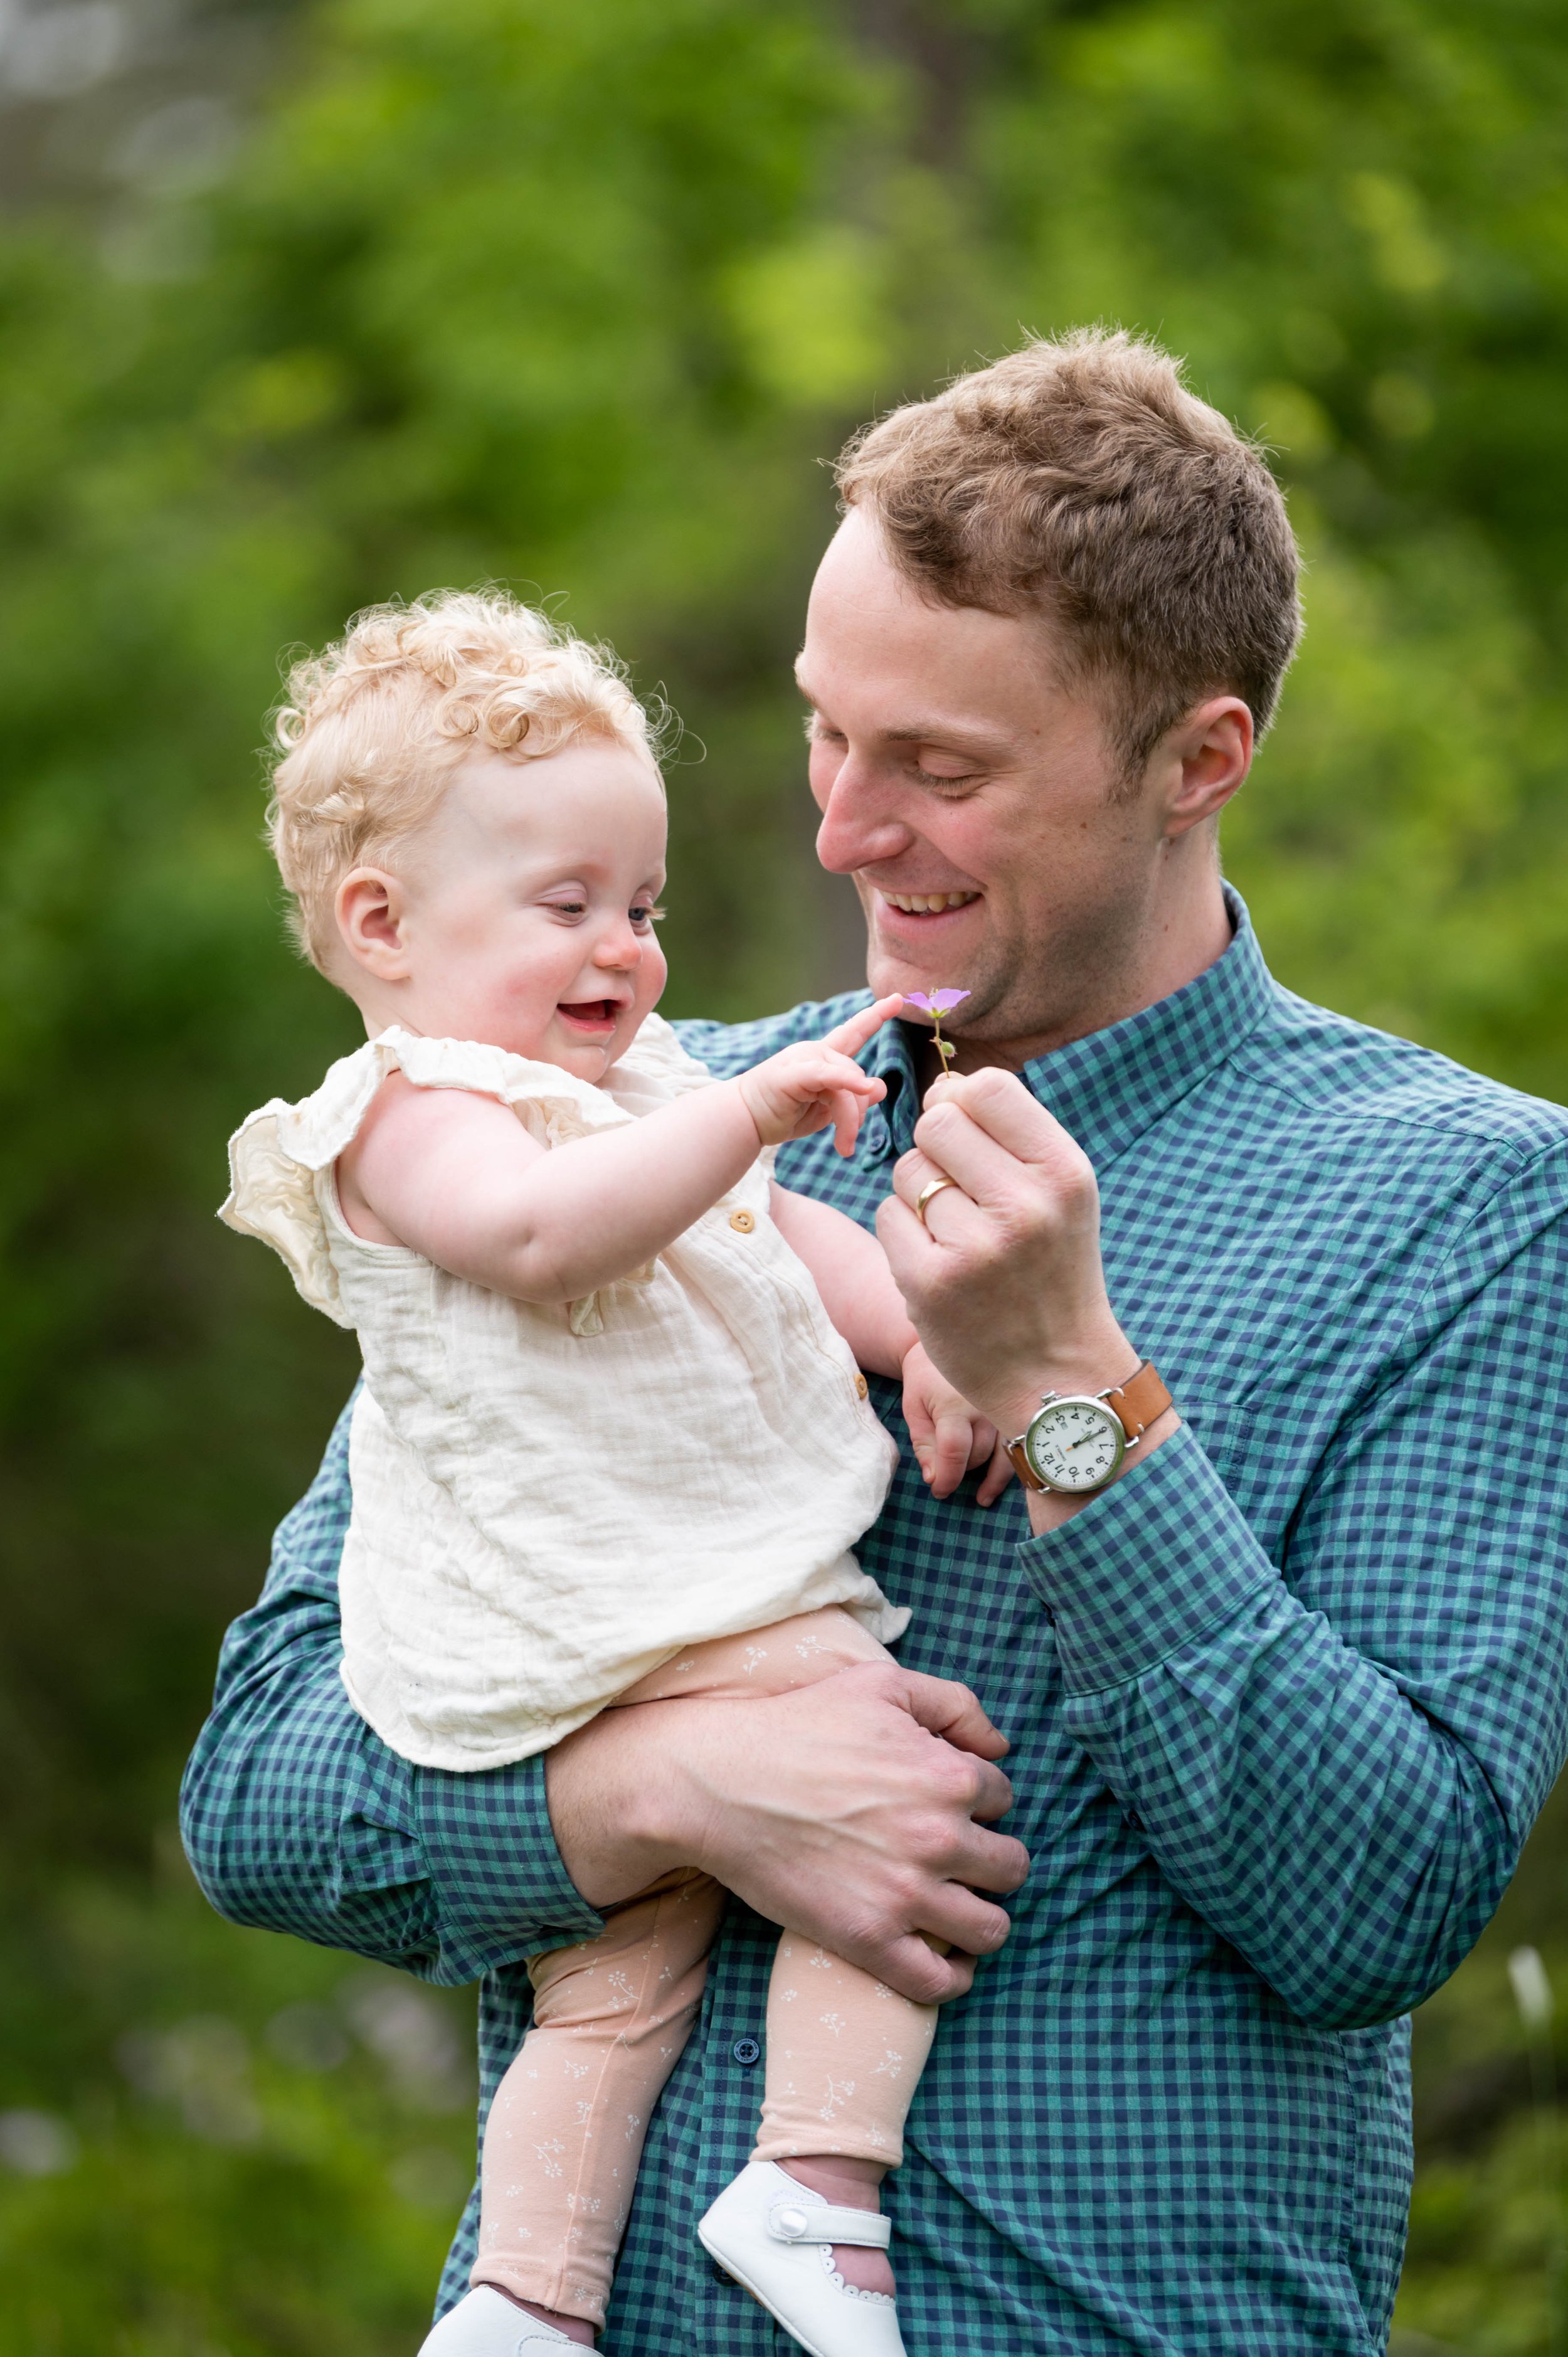 lindsay murphy photography | portland maine family photographer | kettle cove cape elizabeth fathers day mini sessions.jpg